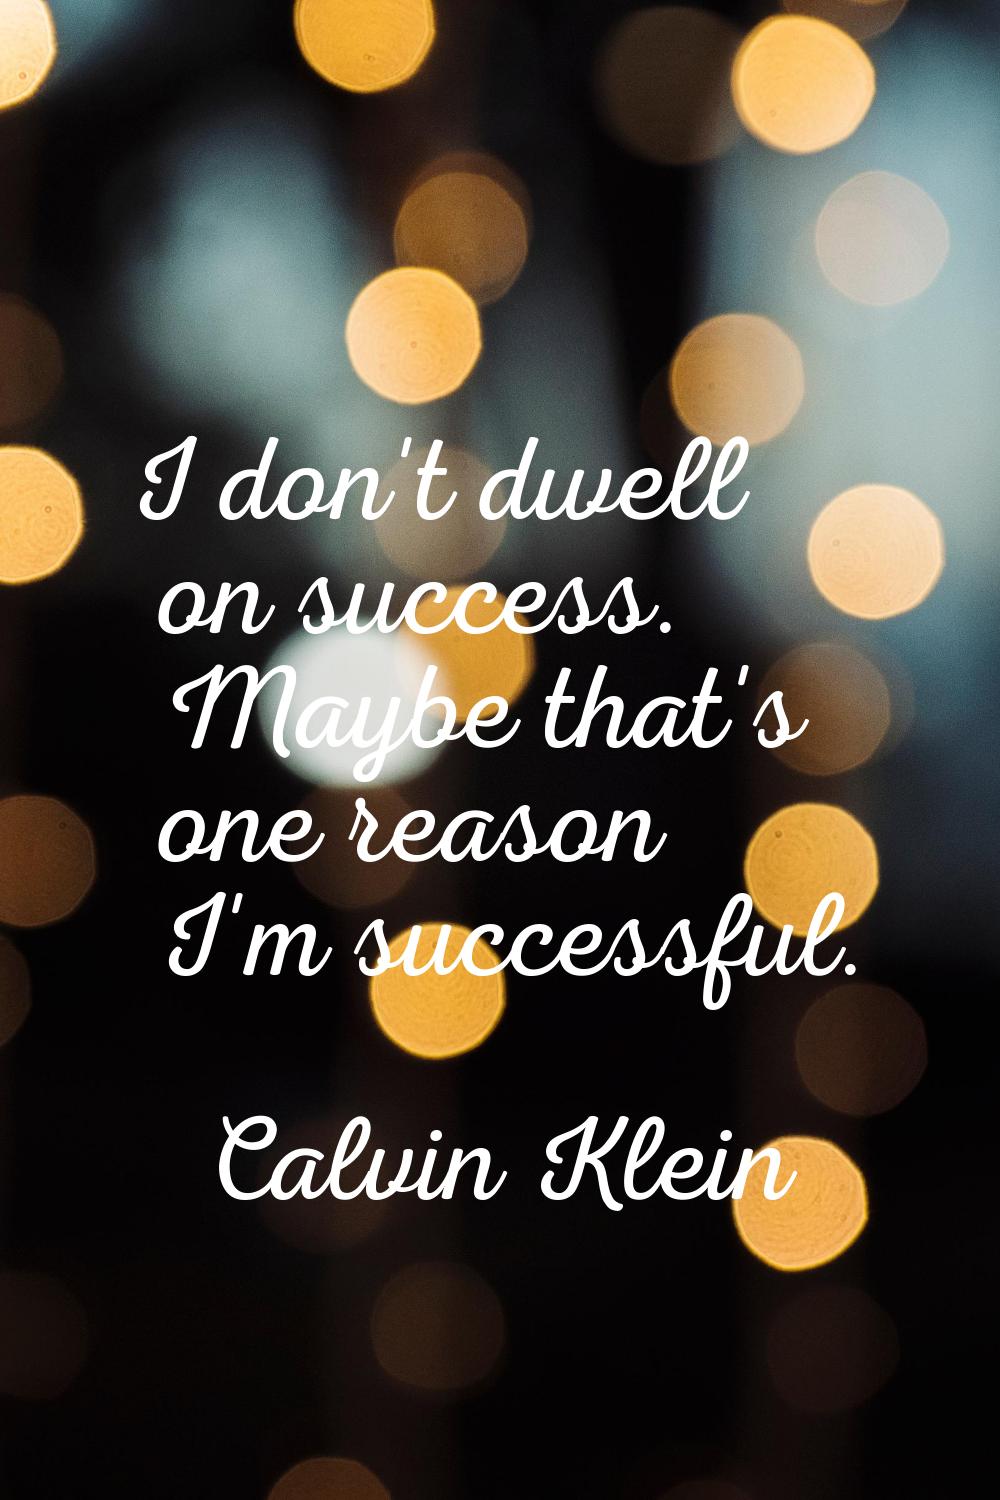 I don't dwell on success. Maybe that's one reason I'm successful.